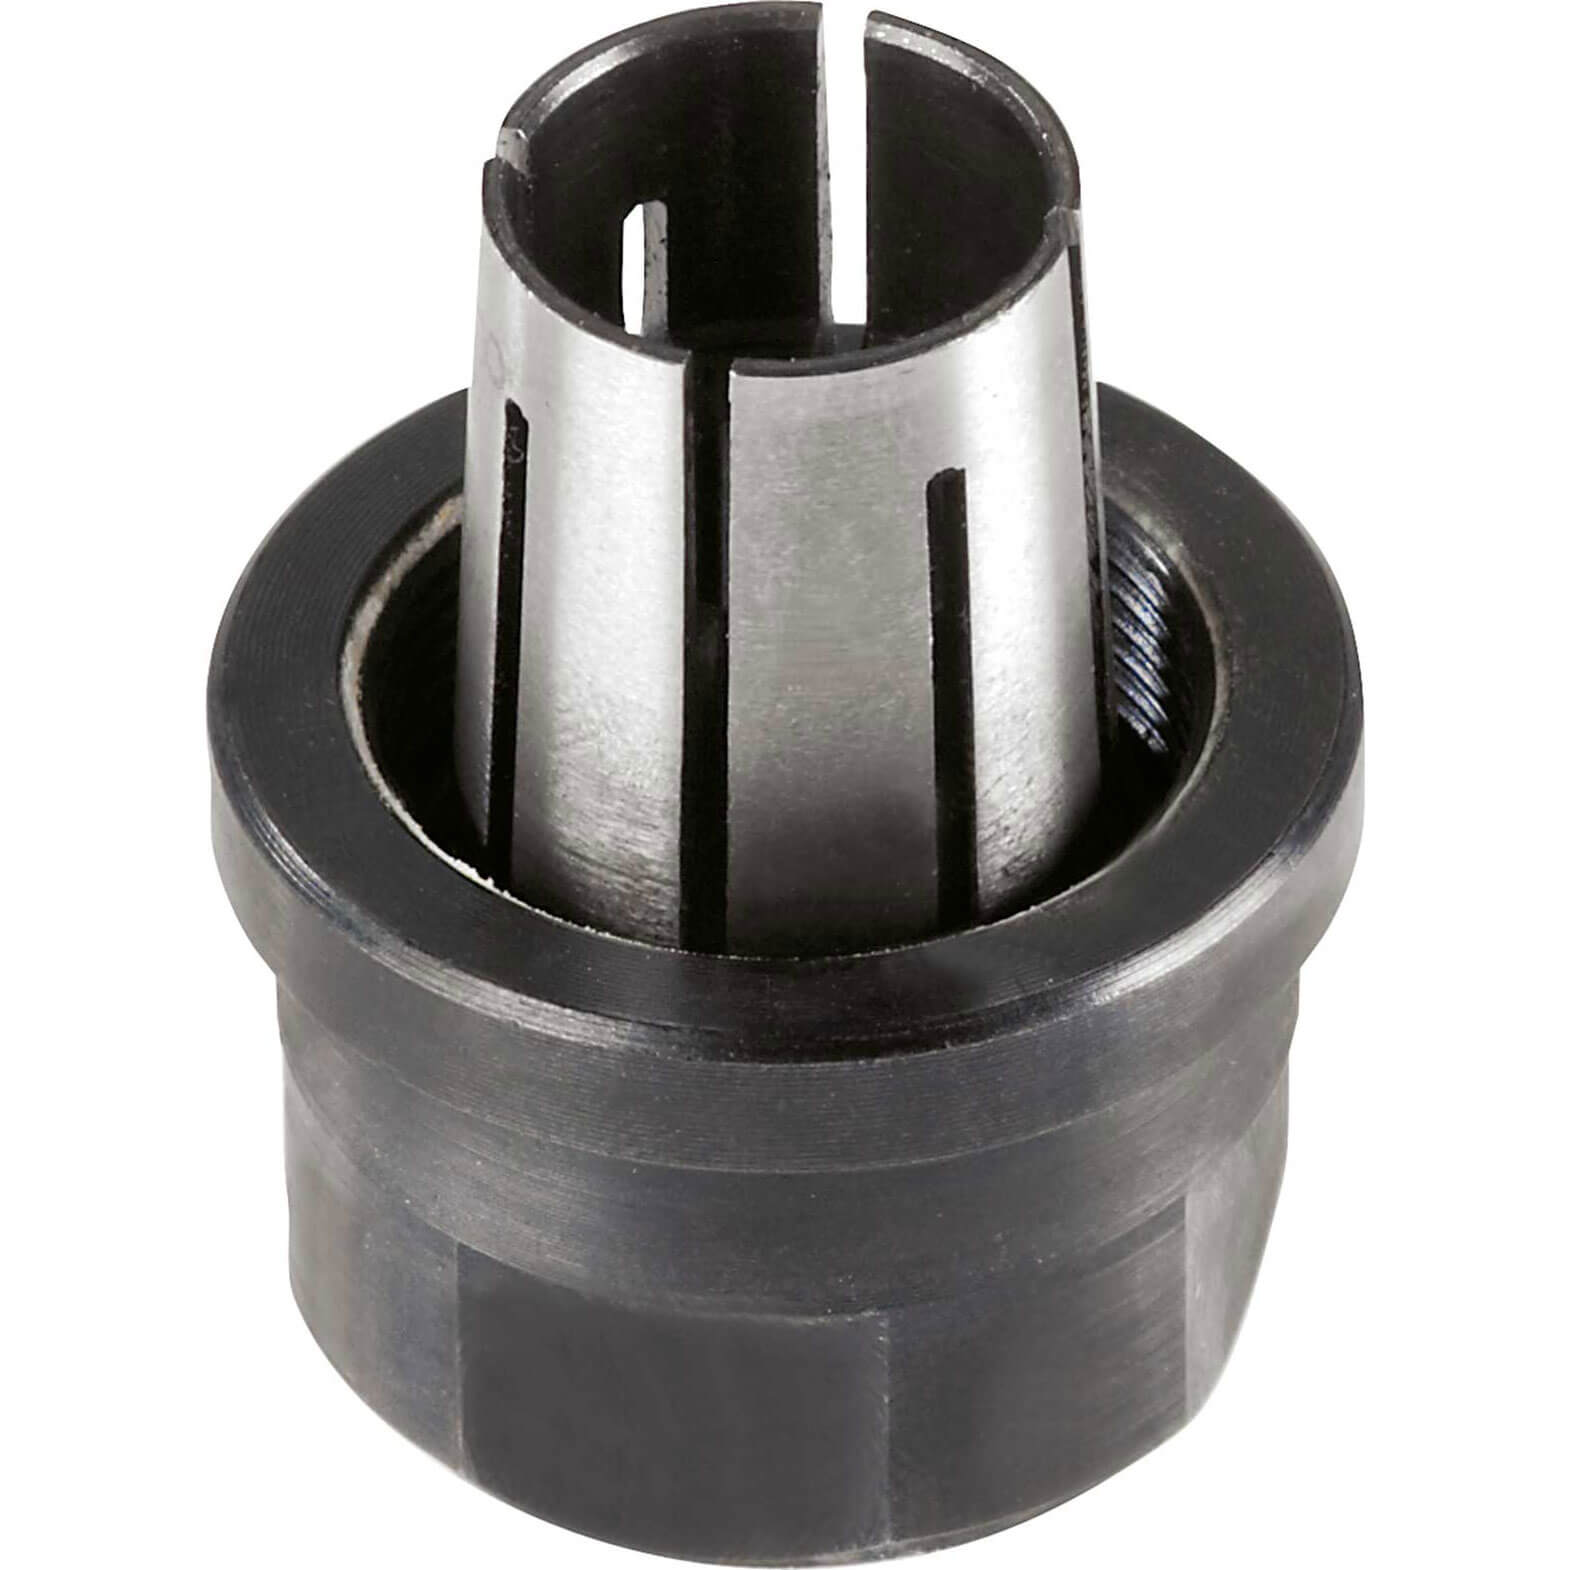 Image of Festool Router Collet For Festool Router OF2200 10mm